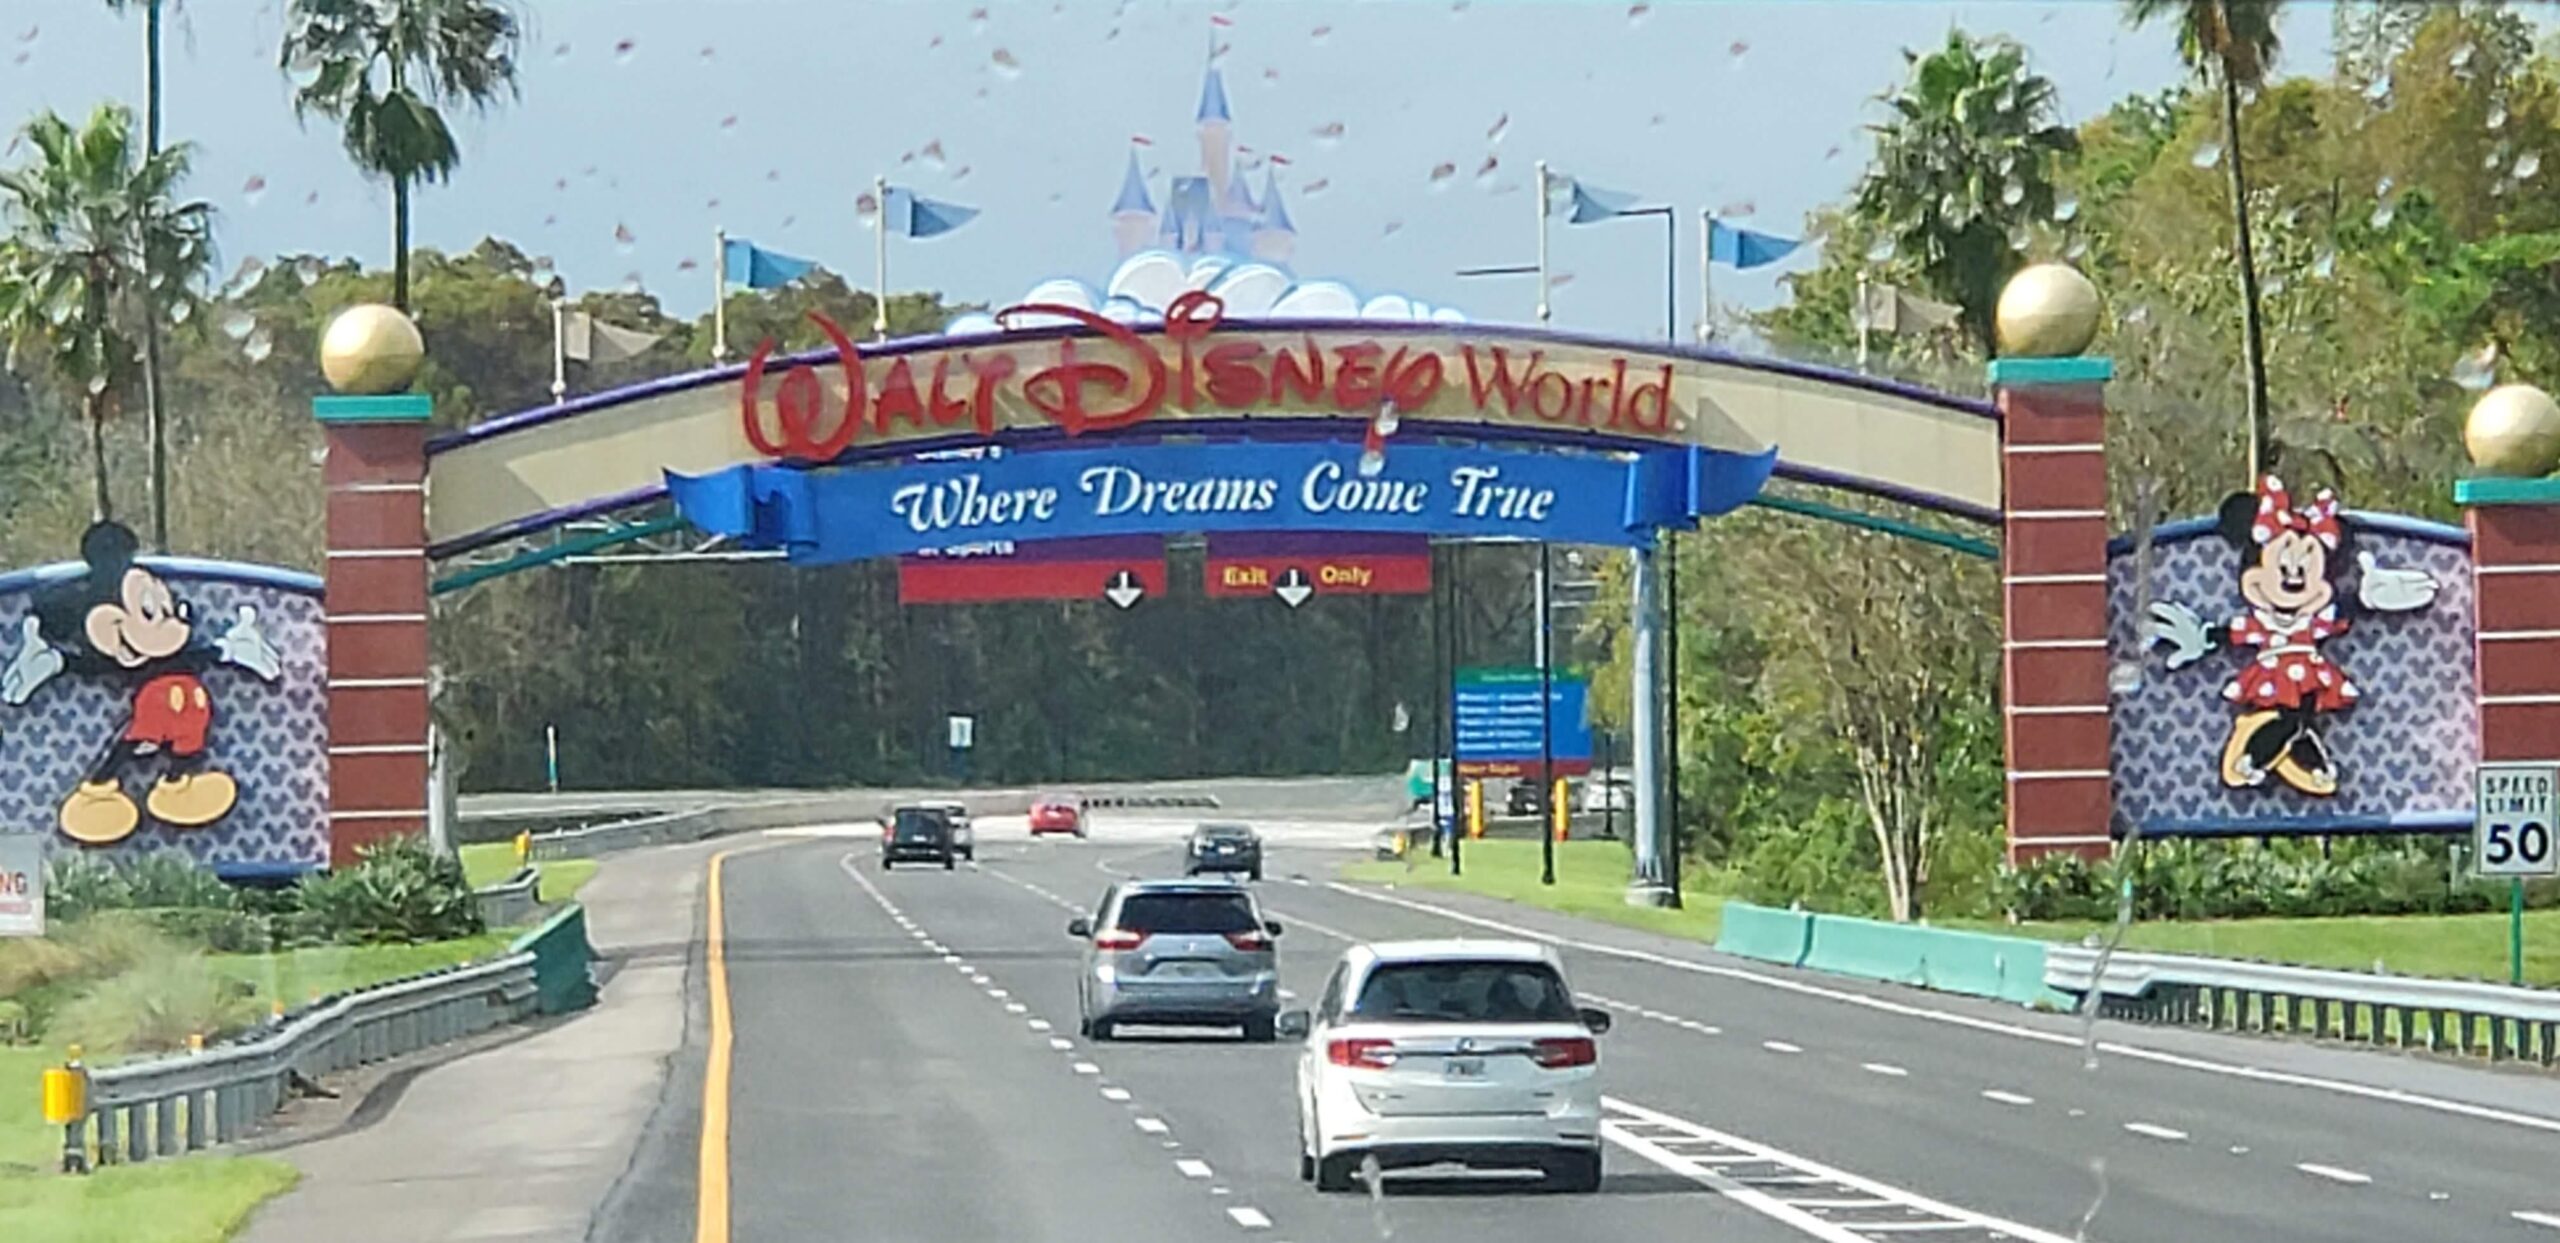 Planning A Disney World Vacation (Complete Guide) 1